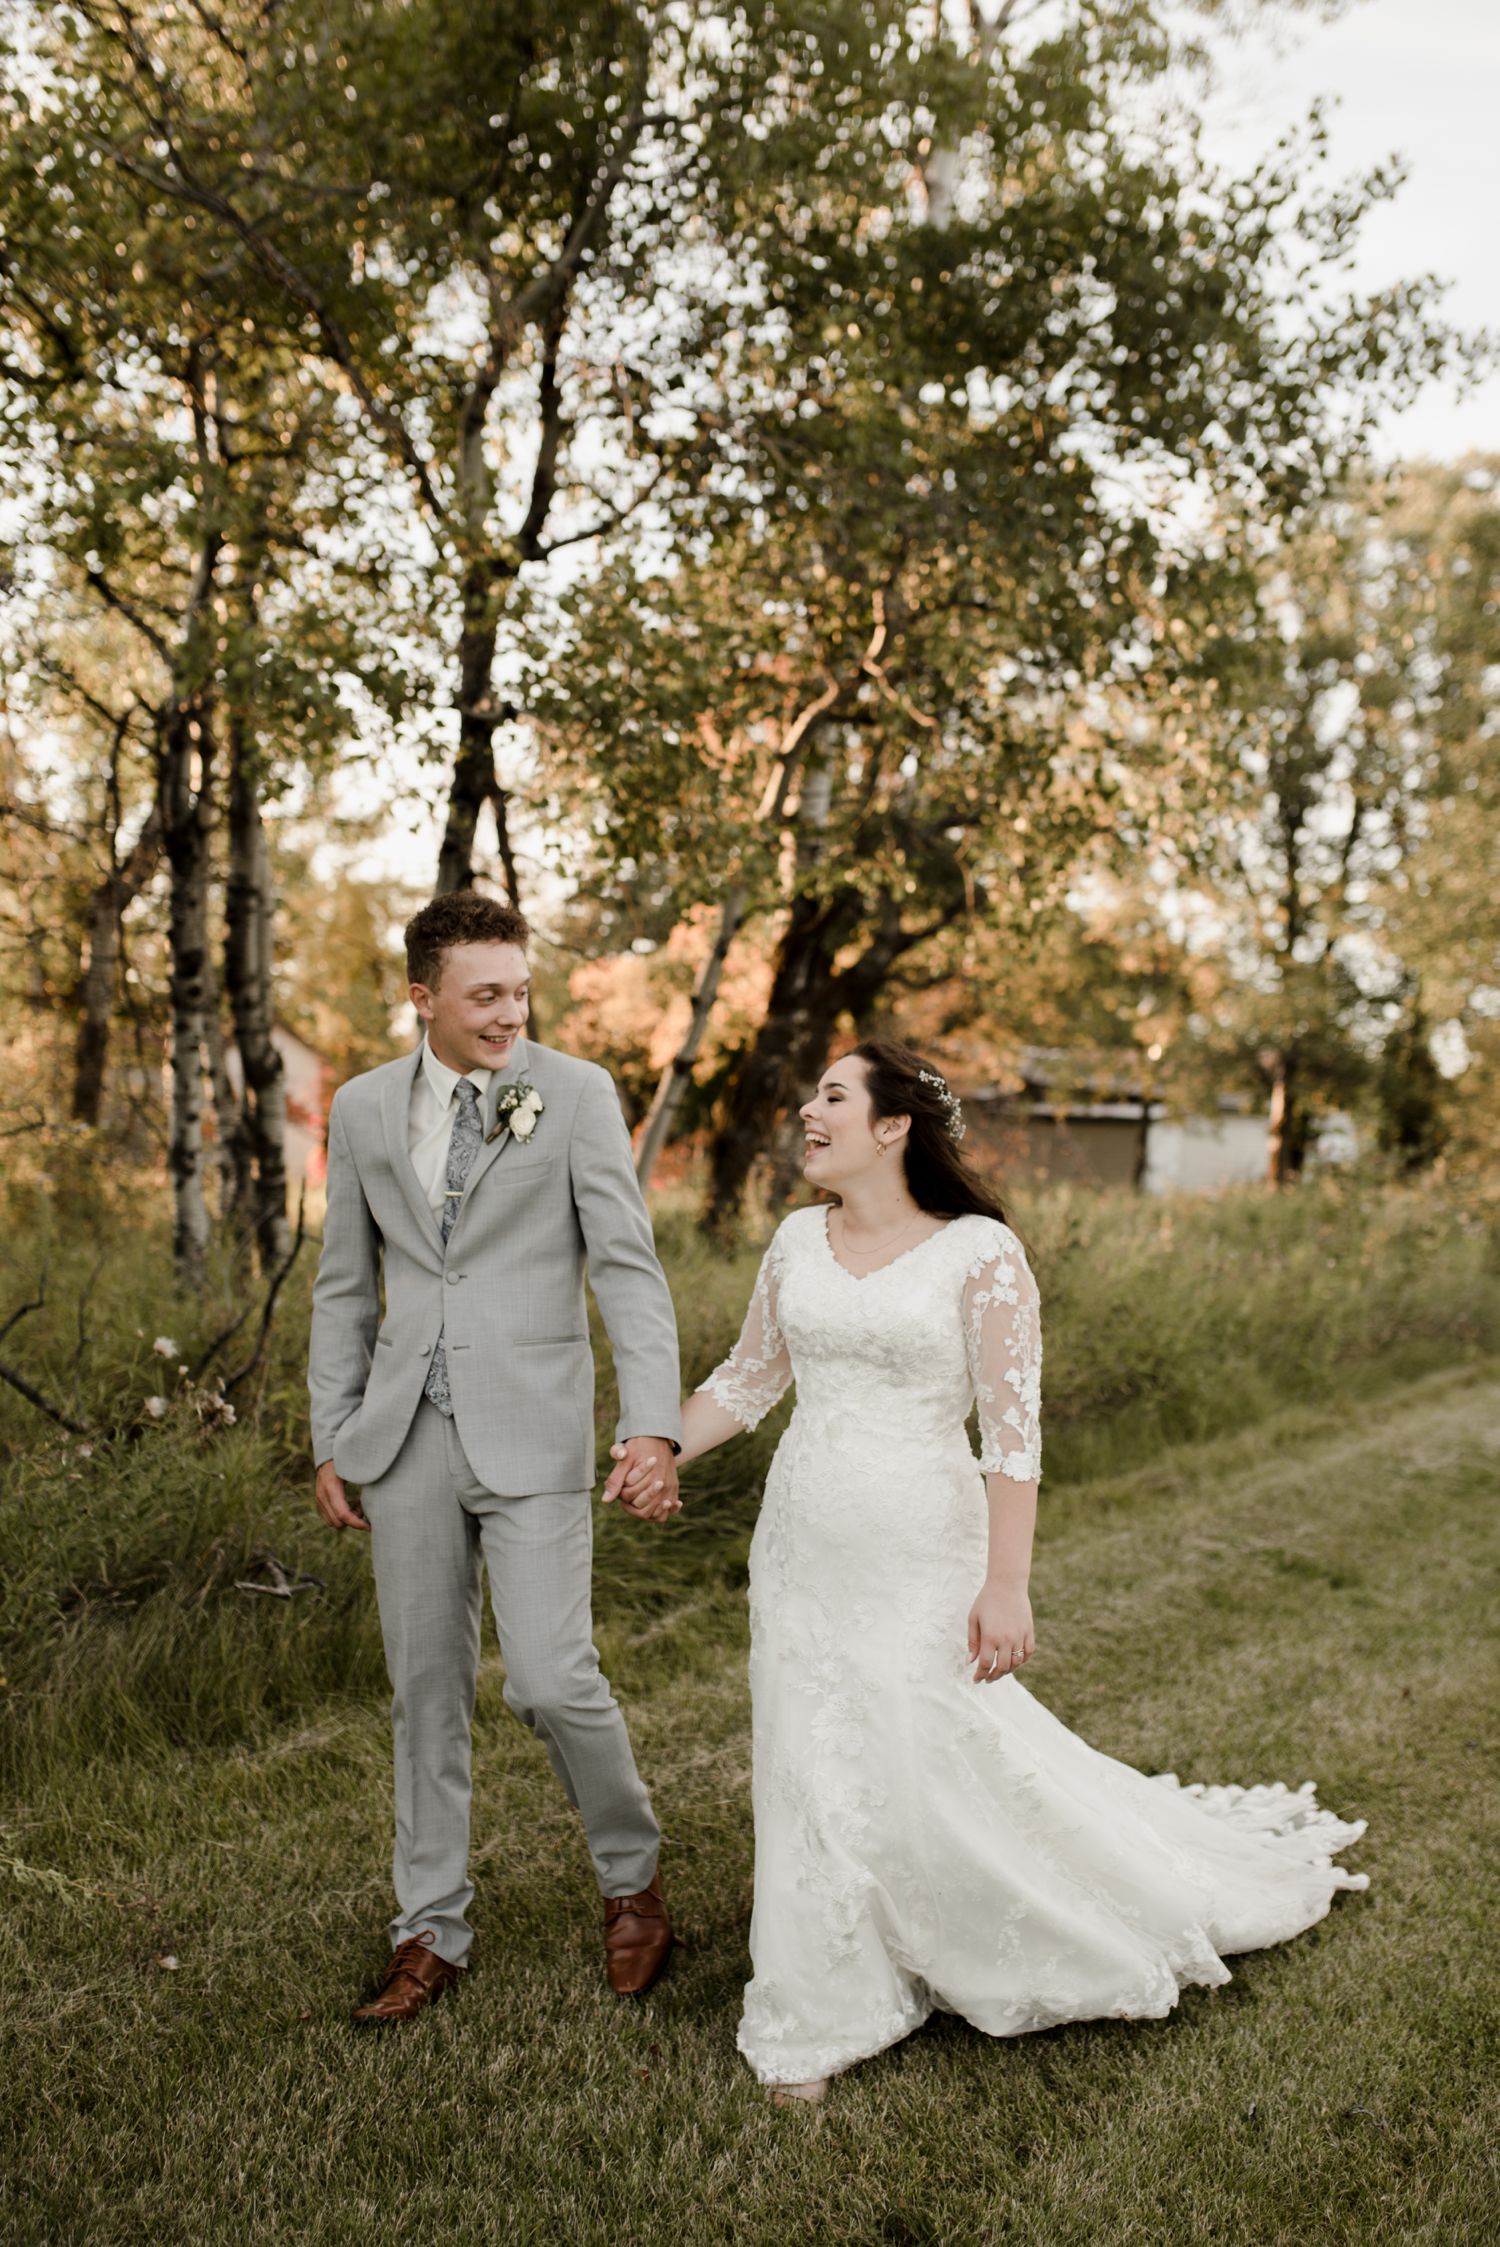 The rustic wedding barn wedding in Steinbach Manitoba in fall, photographed by Vanessa Renae Photography